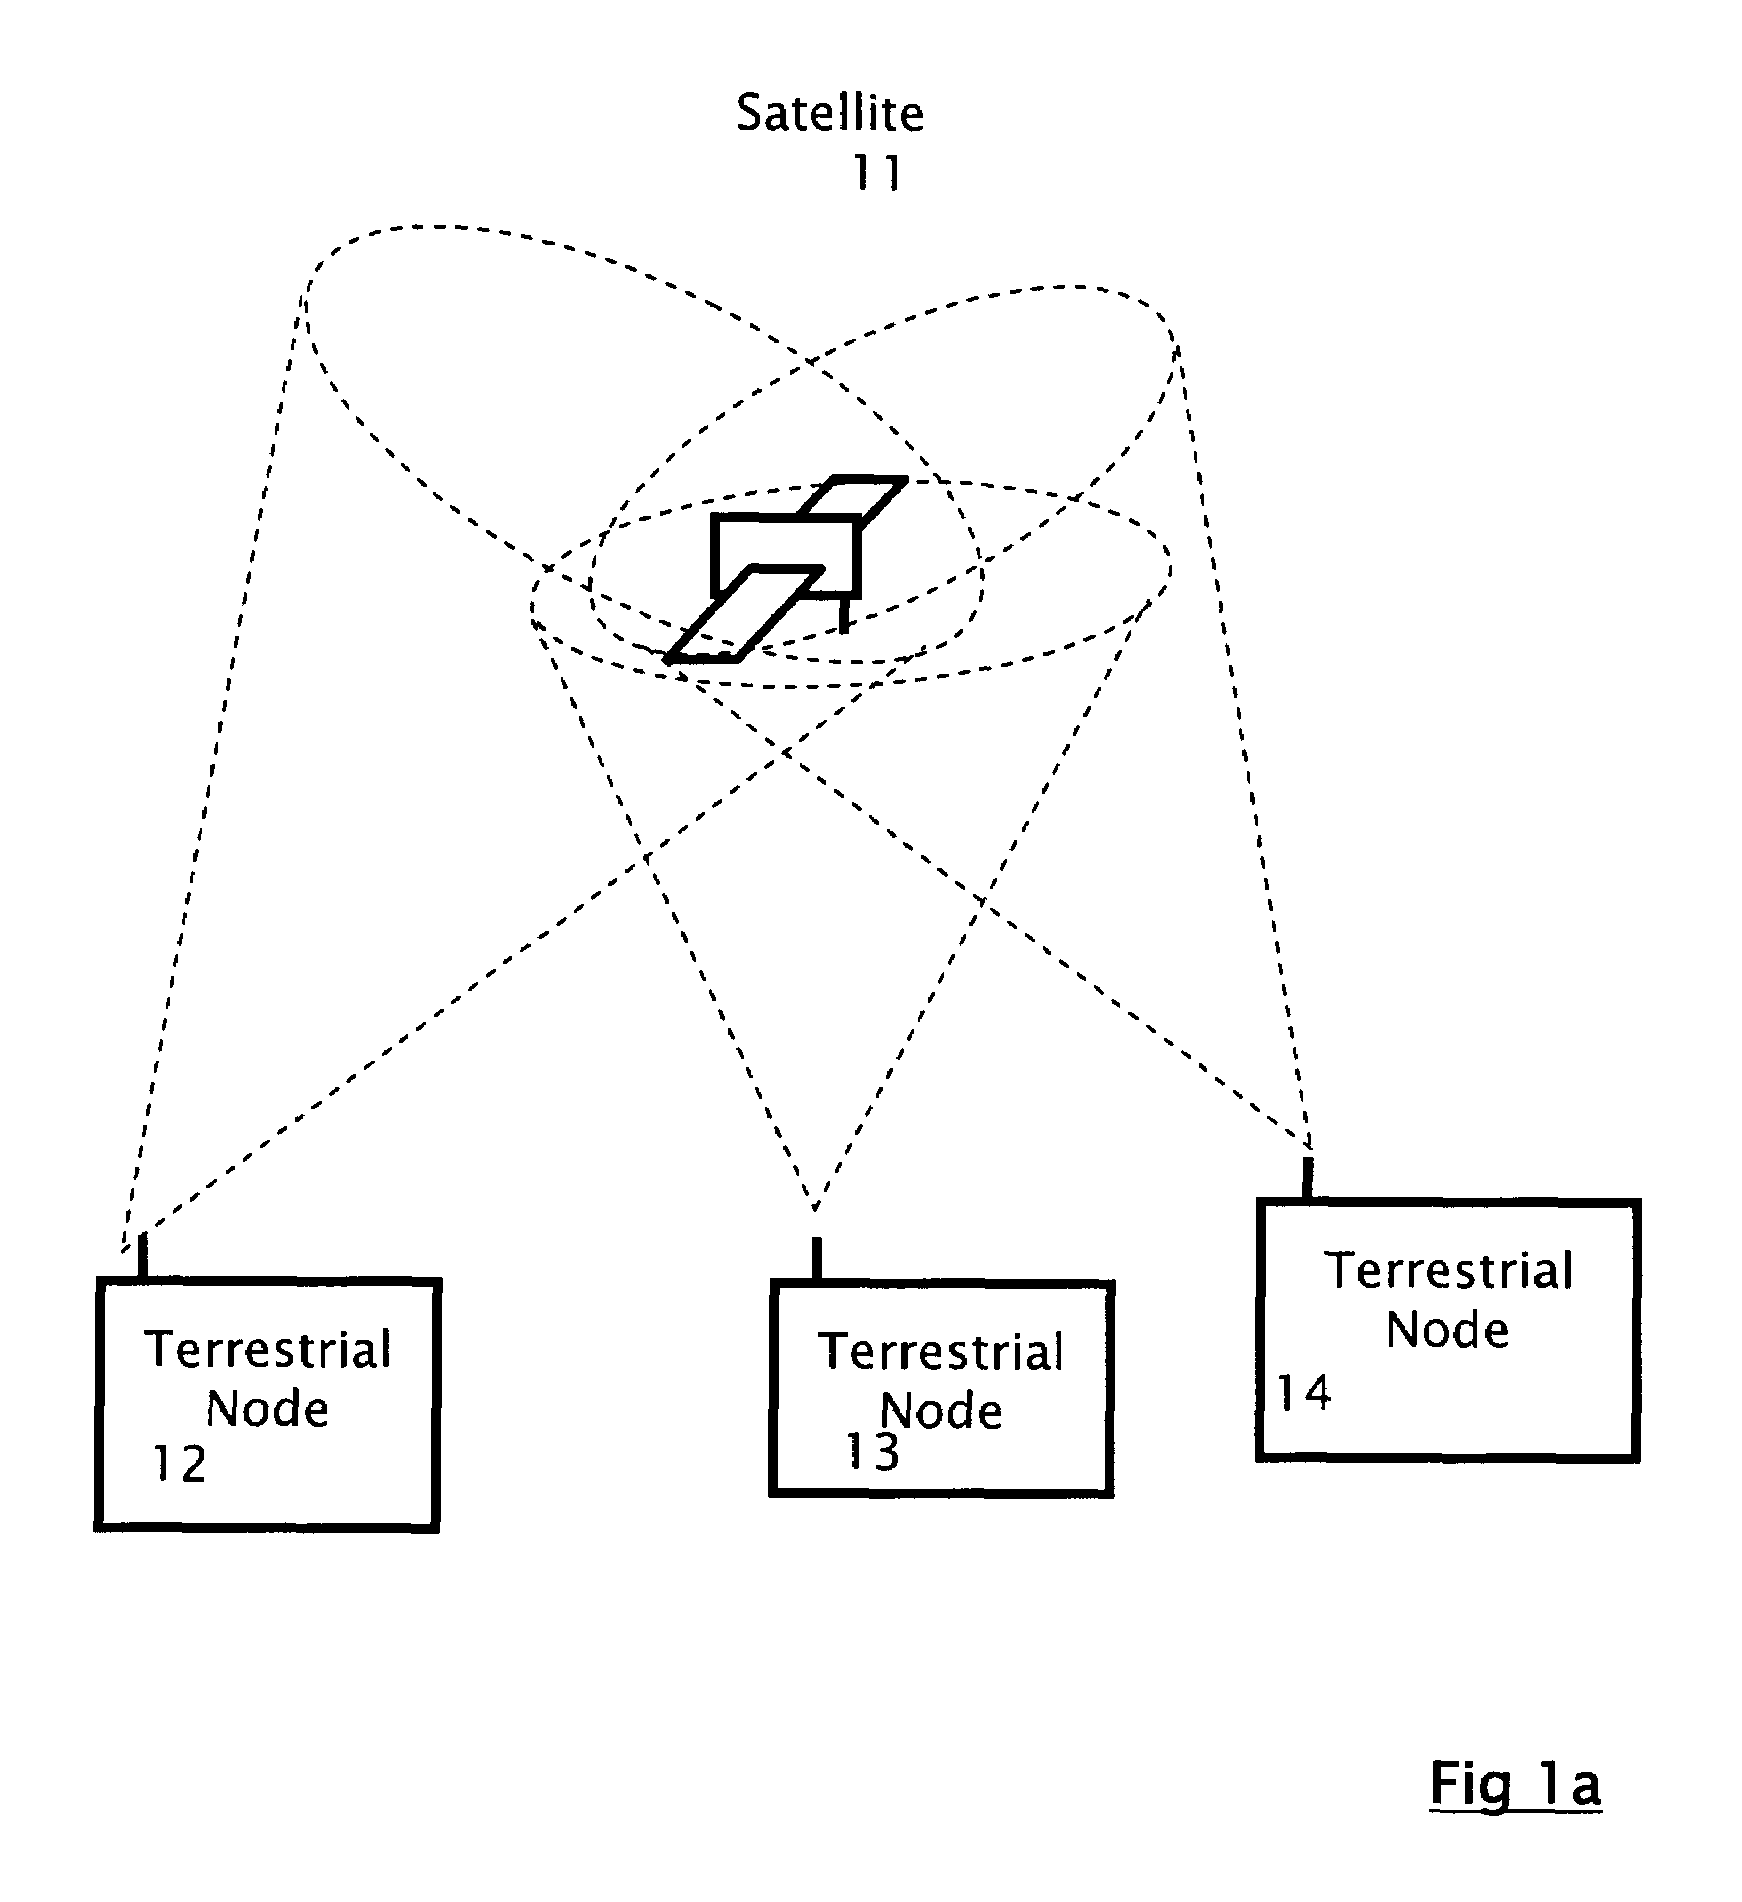 Method for synchronizing terrestrial nodes equipped with GNSS receivers and belonging to a terrestrial network